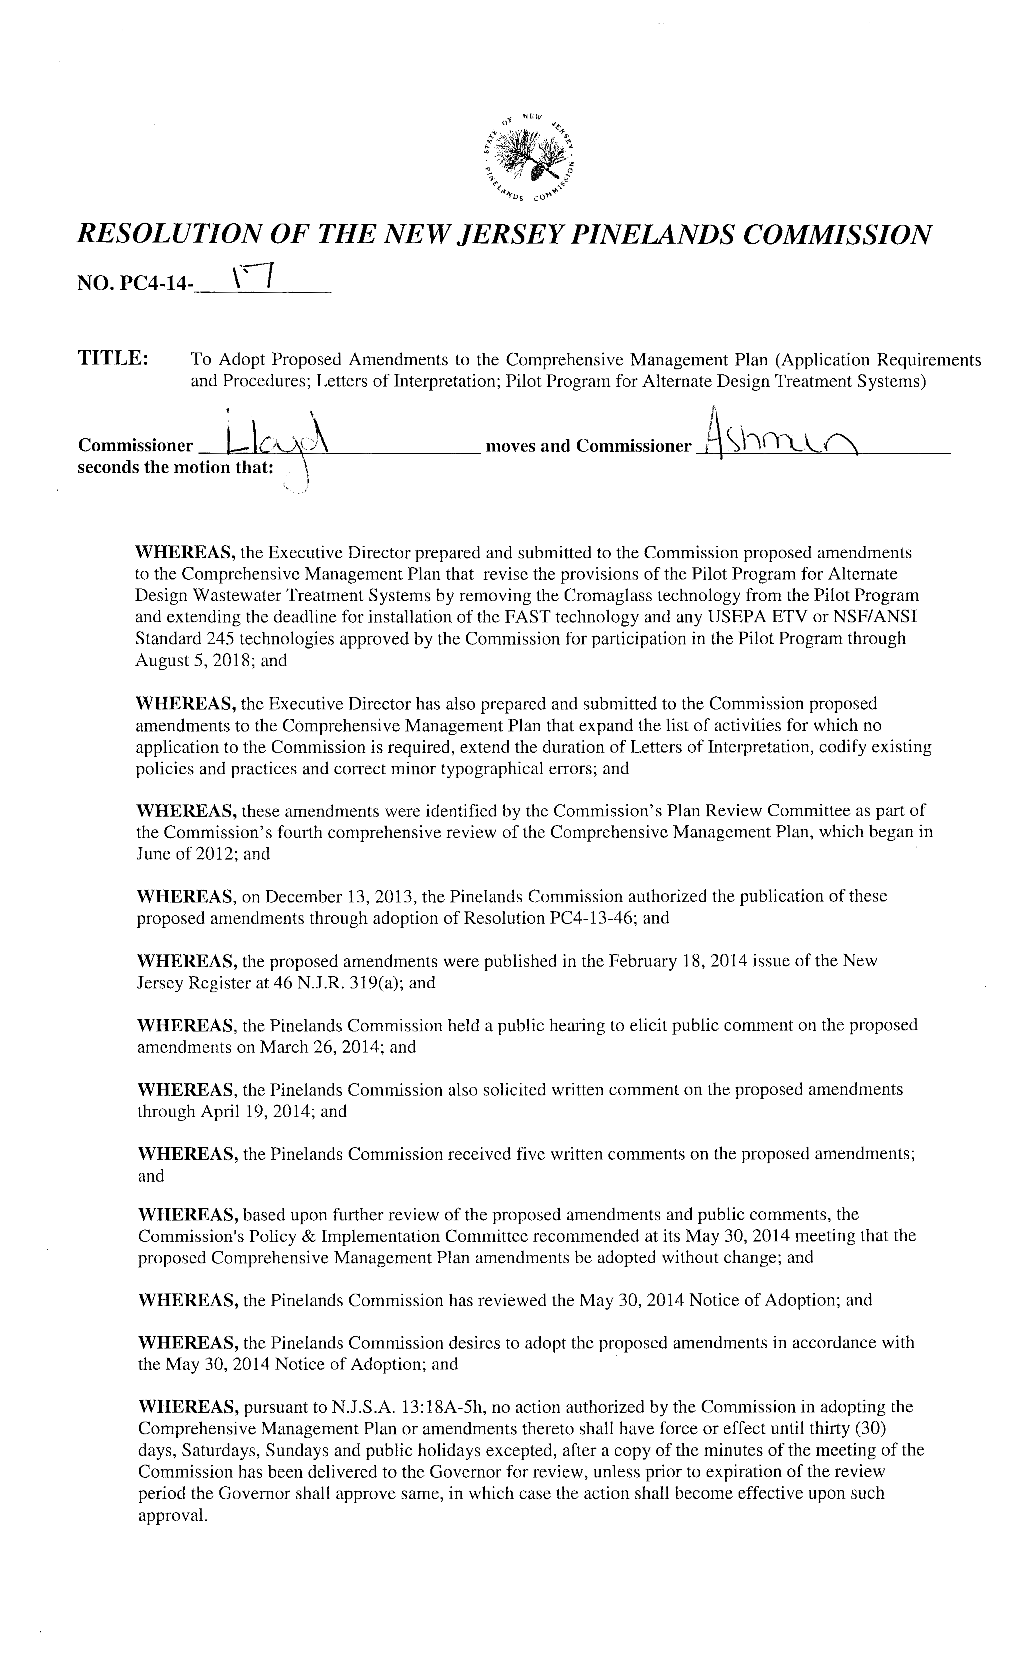 Resolution of the New Jersey Pinelands Commission '